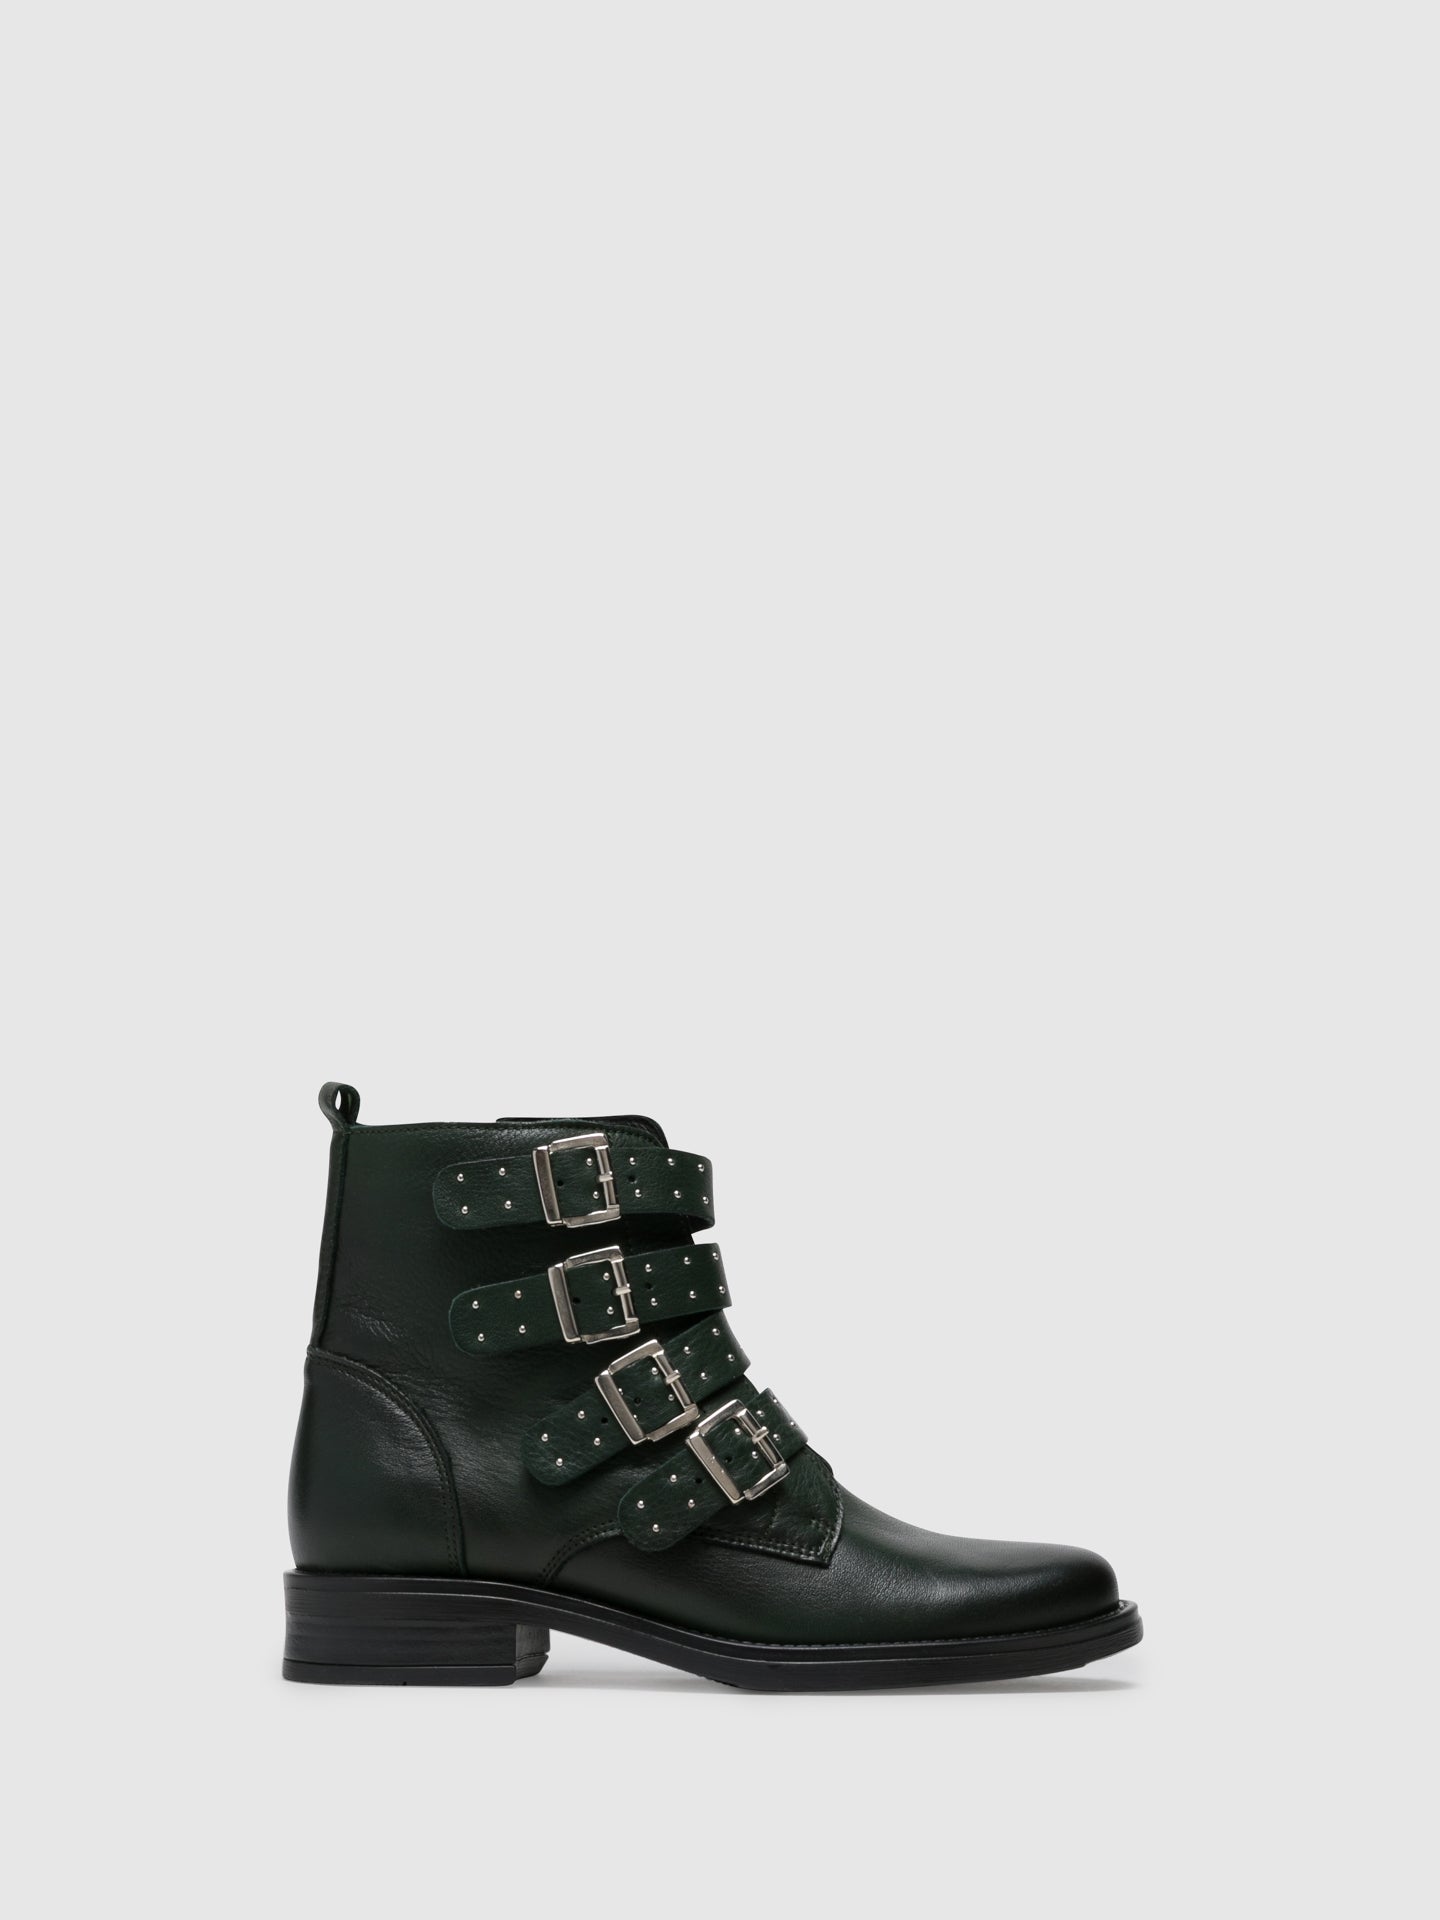 Foreva Green Zip up Boots